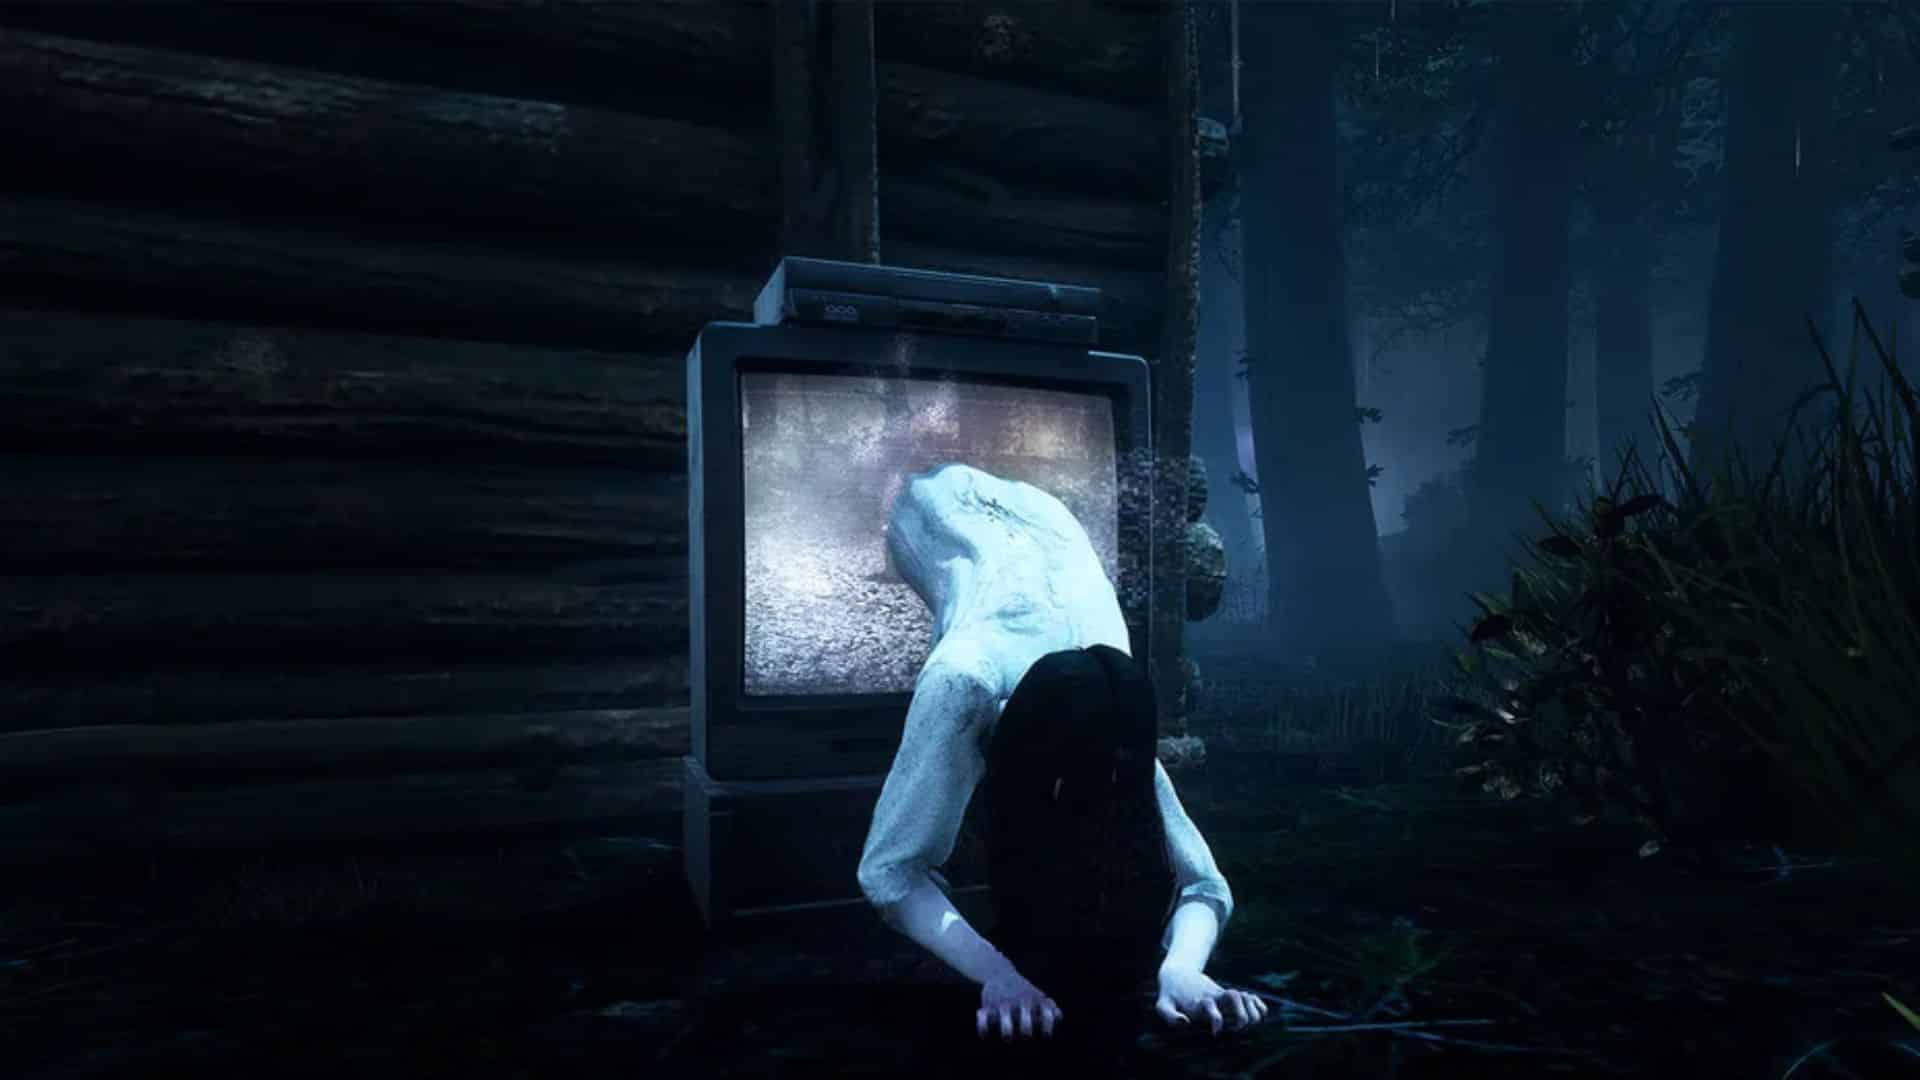 sadako climbing out of tv in dead by daylight